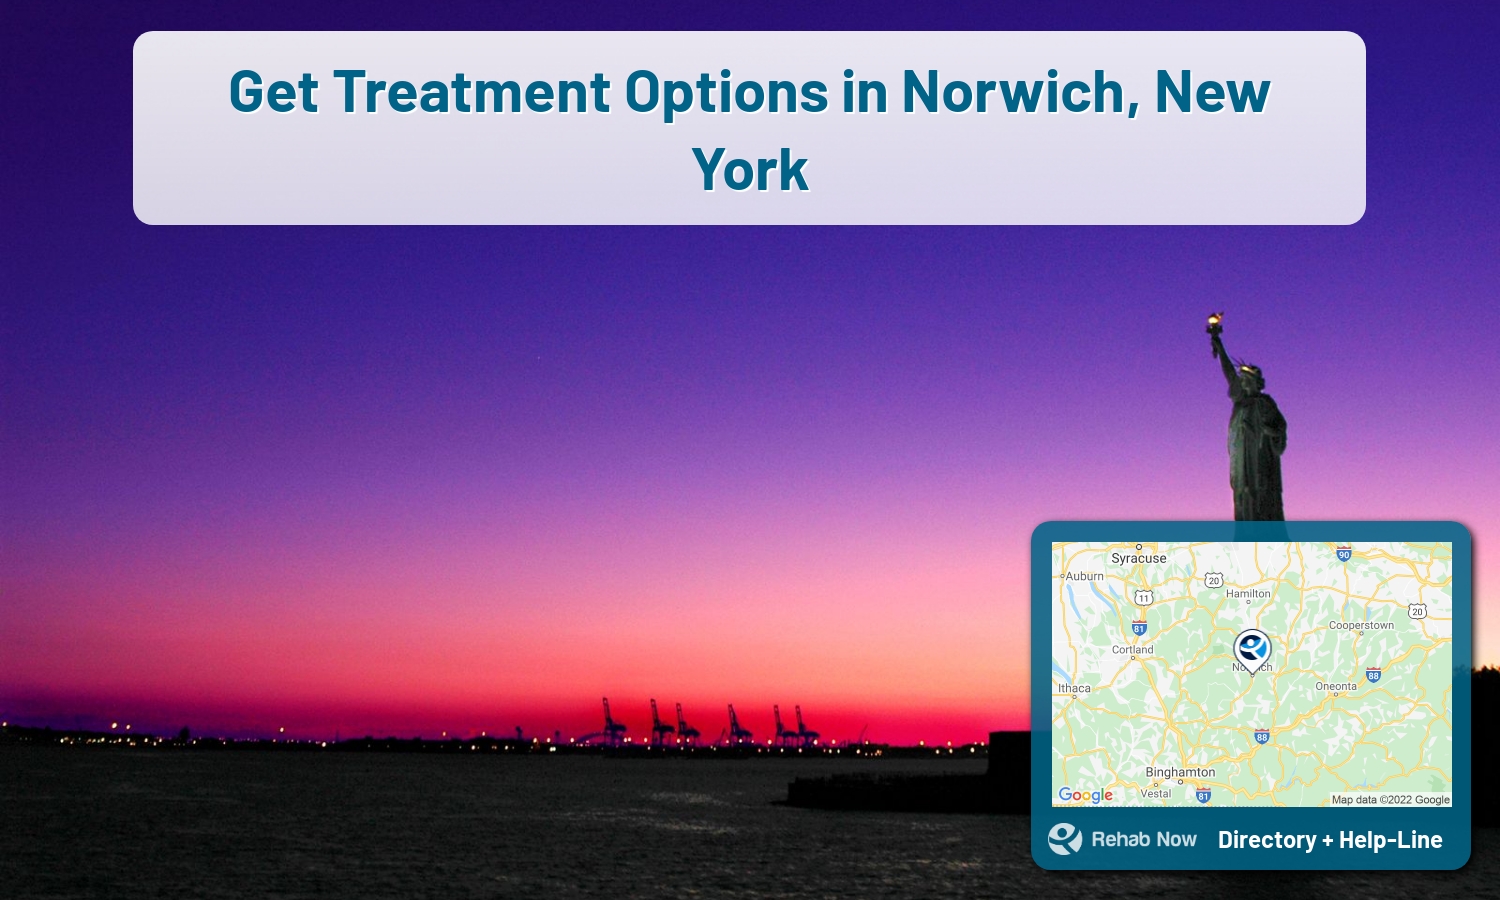 Find drug rehab and alcohol treatment services in Norwich. Our experts help you find a center in Norwich, New York